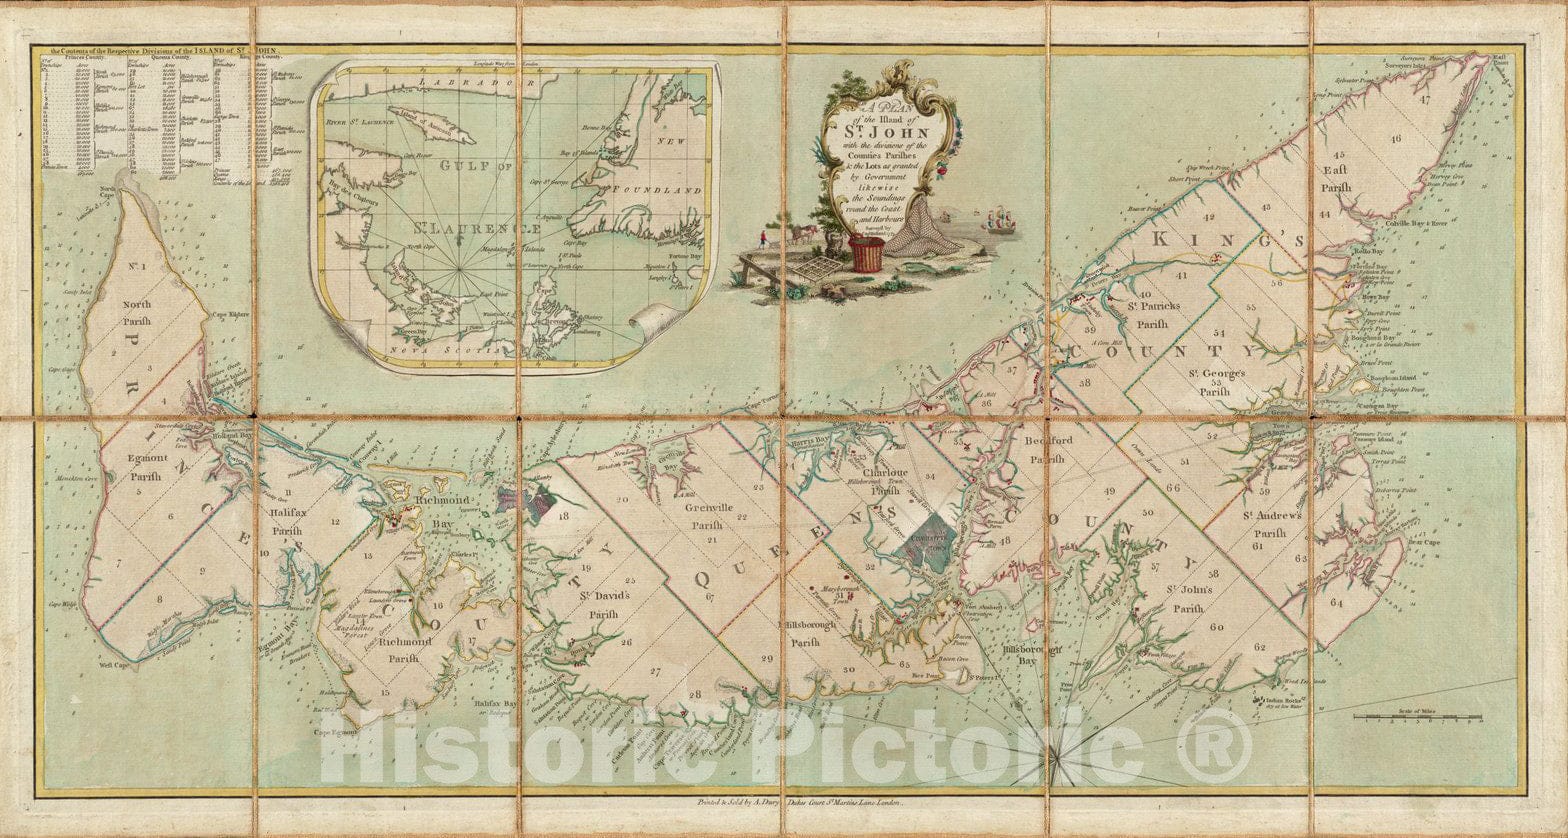 Historical Map, 1775 A Plan of The Island of St. John with The divisions of The Counties, parishes, The Lots as Granted by Government, Vintage Wall Art